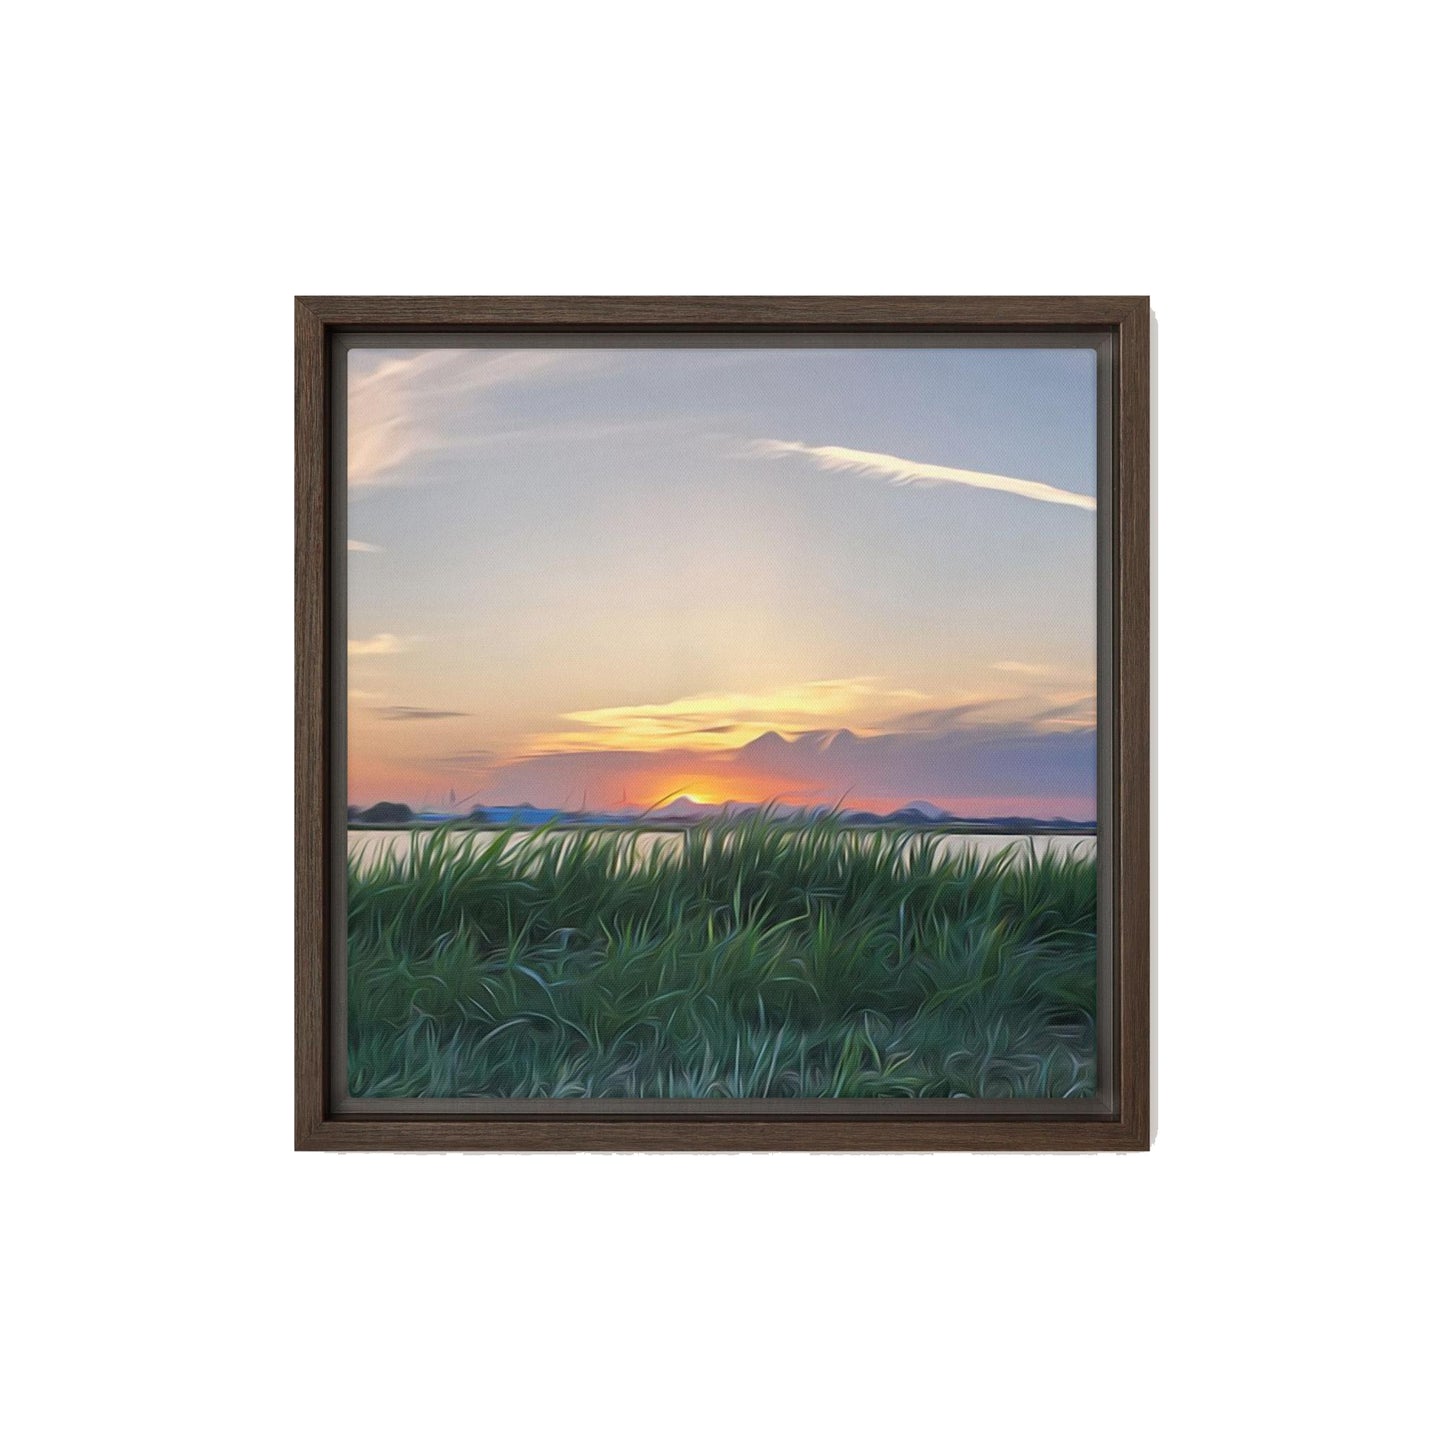 Laying in The Grass Framed Print